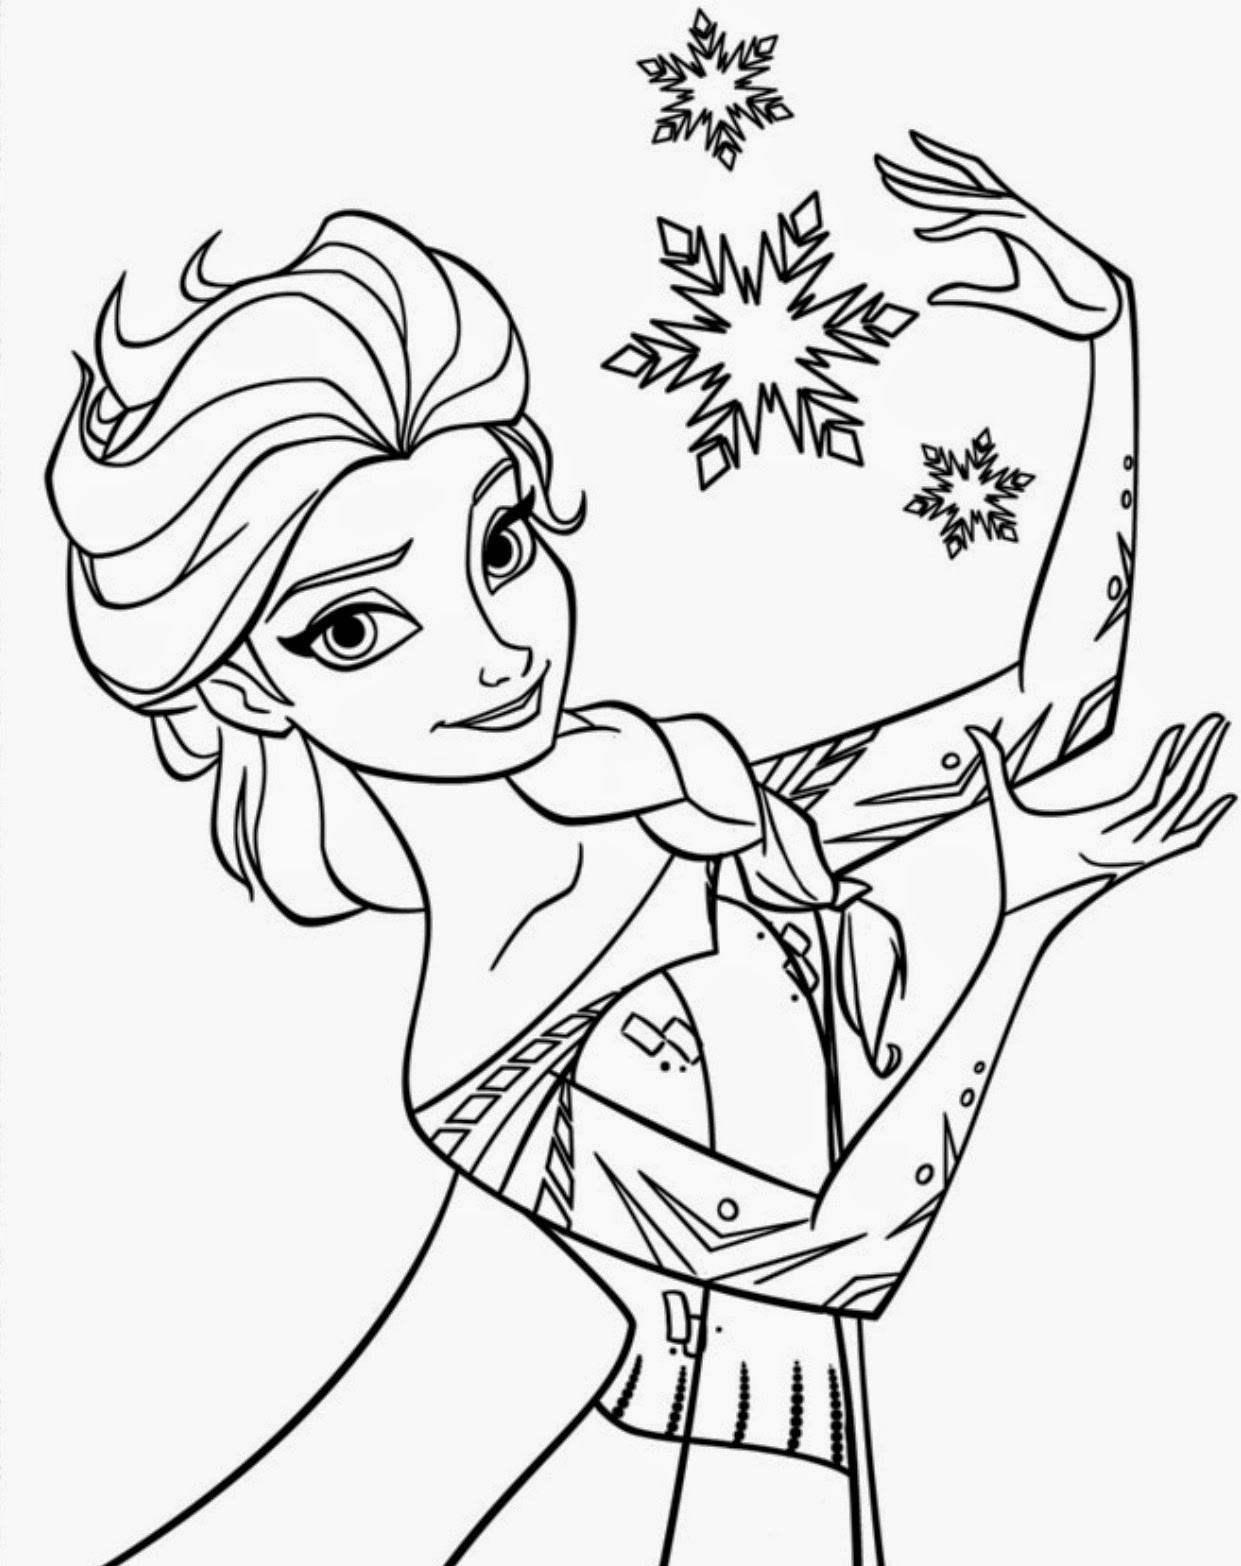 Printable Disney Coloring Pages
 15 Beautiful Disney Frozen Coloring Pages Free Instant